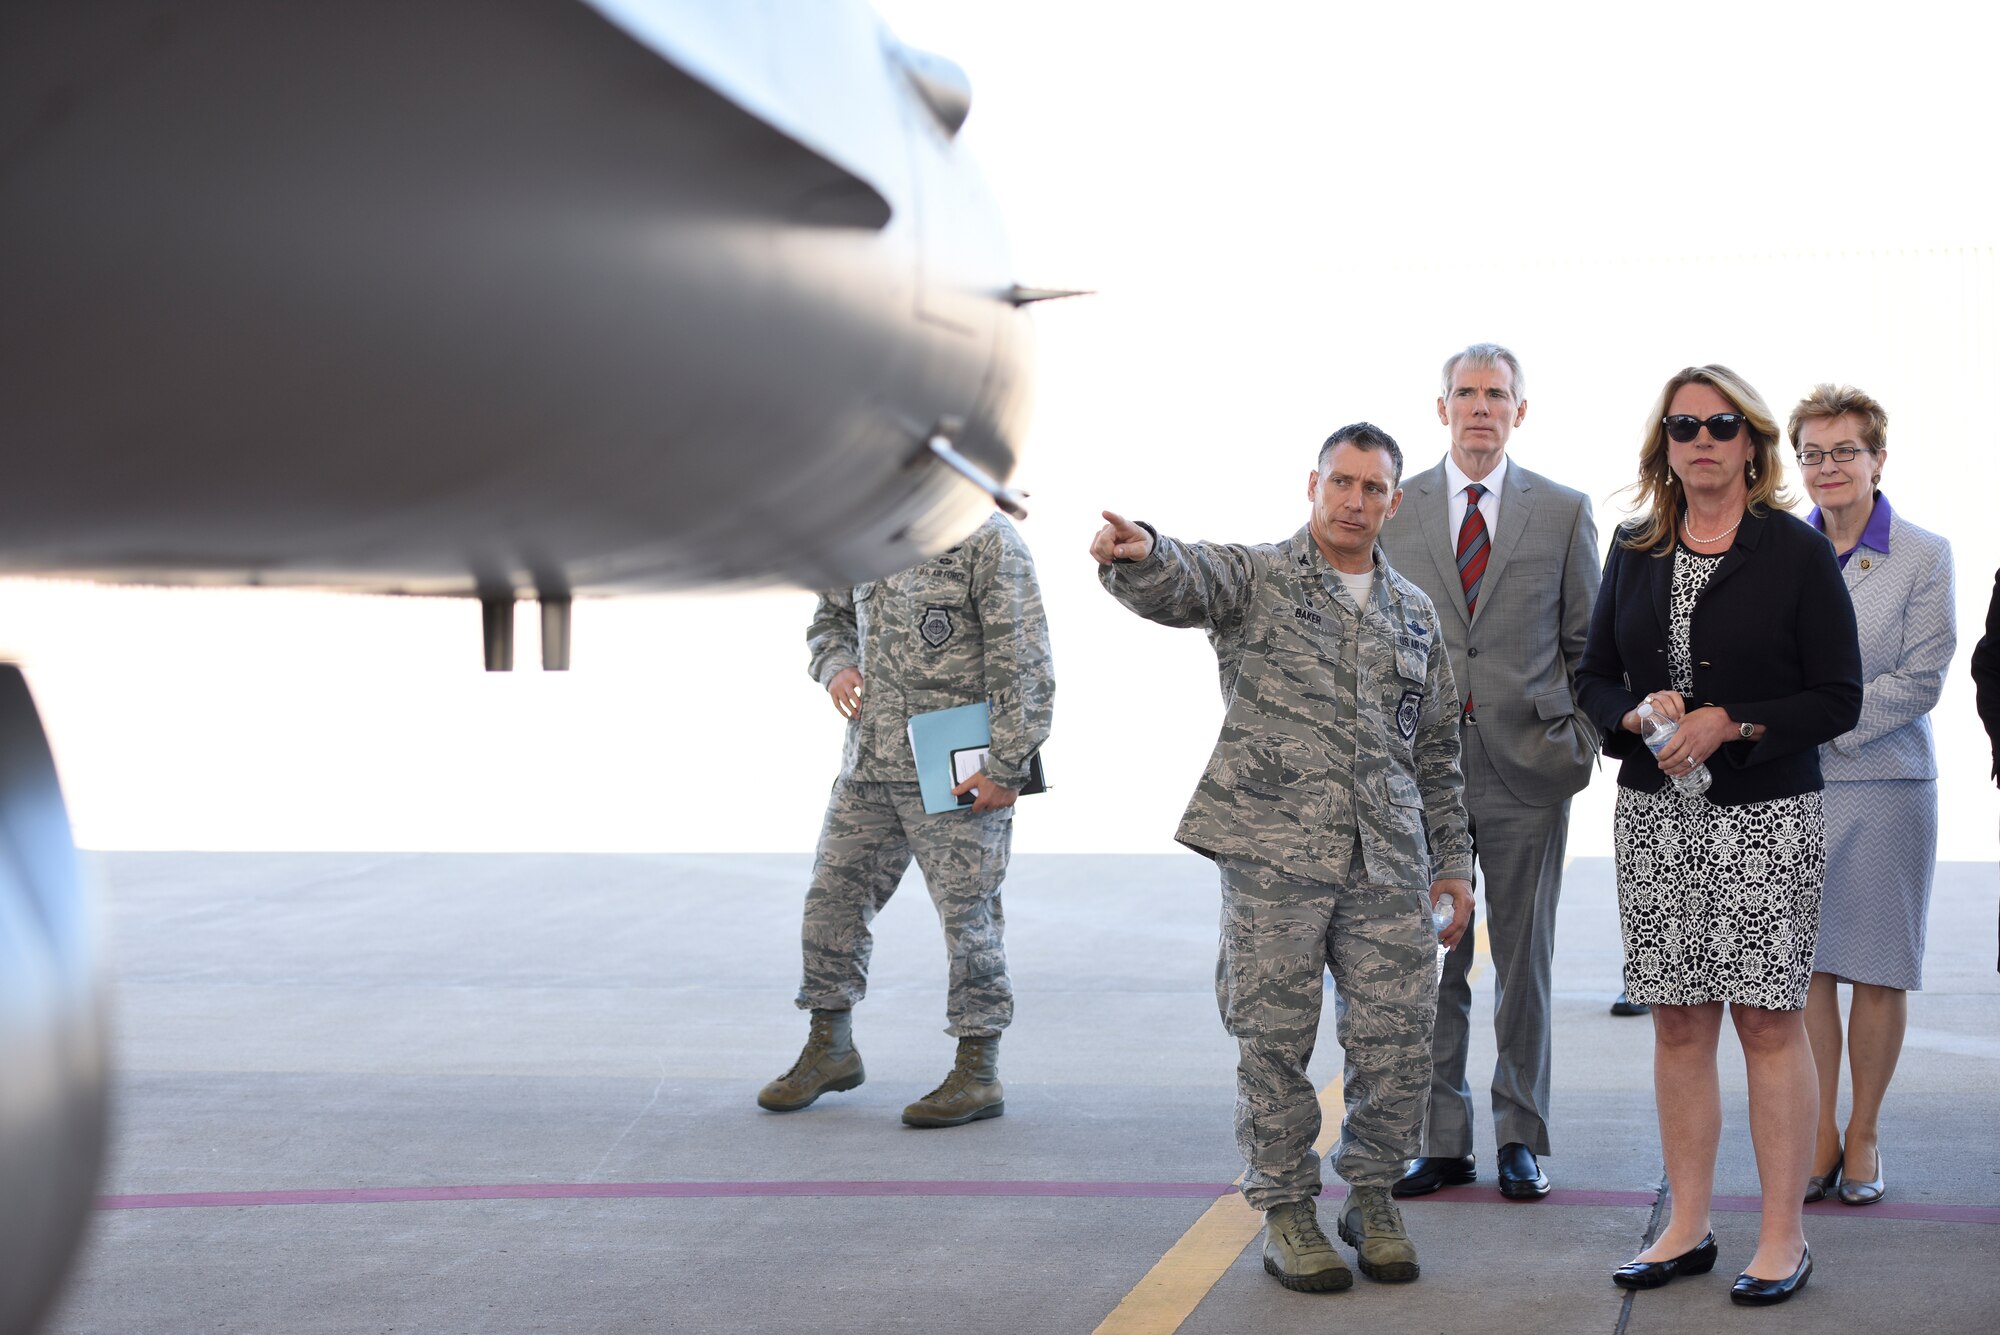 Secretary of the Air Force Deborah Lee James visited the Airmen of the 180th Fighter Wing, Ohio Air National Guard, located in Swanton, Ohio for a tour of the base June 6, 2016. (U.S. Air National Guard photo by Staff Sgt. Shane Hughes)